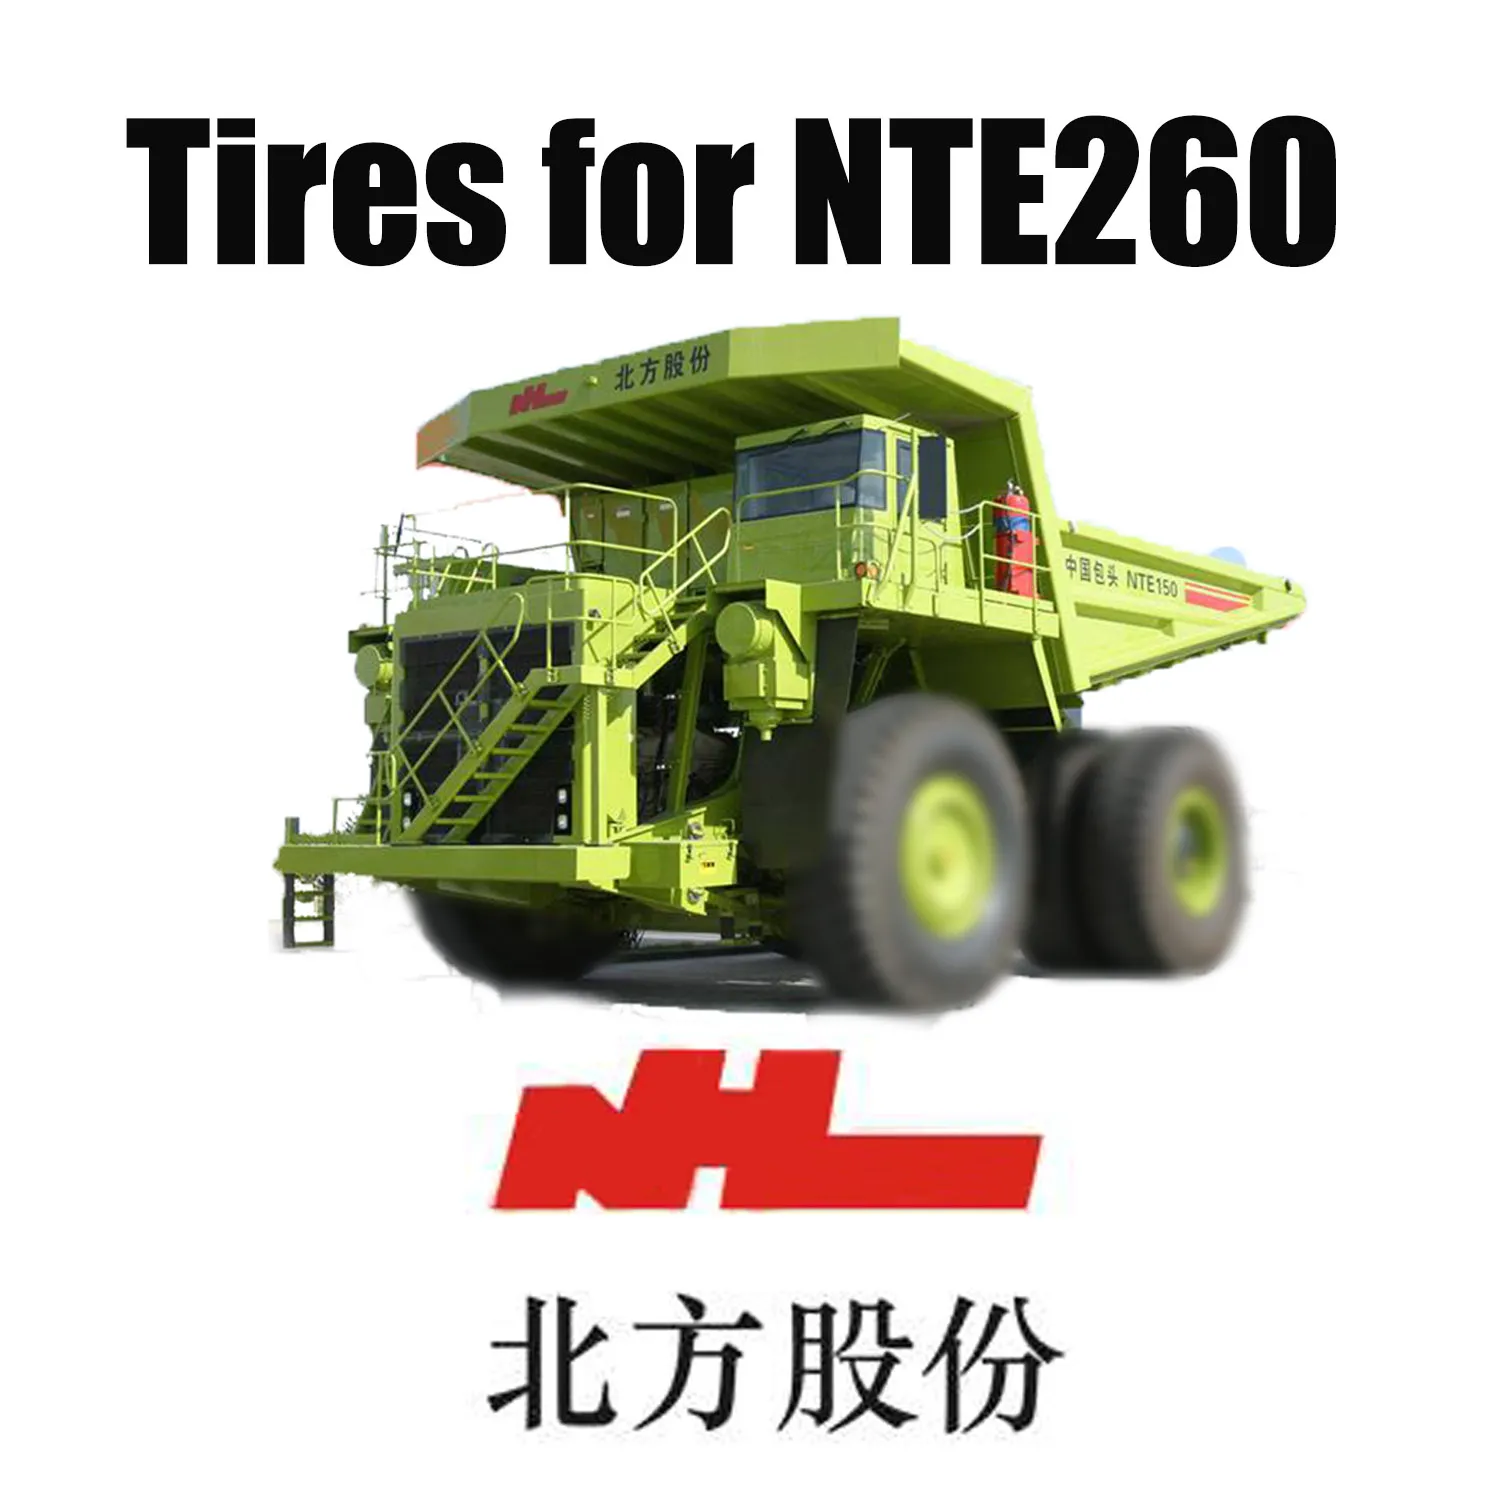 50/80R57 Off-the-Road Mining Tires mounted on NTE 260 TEREX Haul Trucks